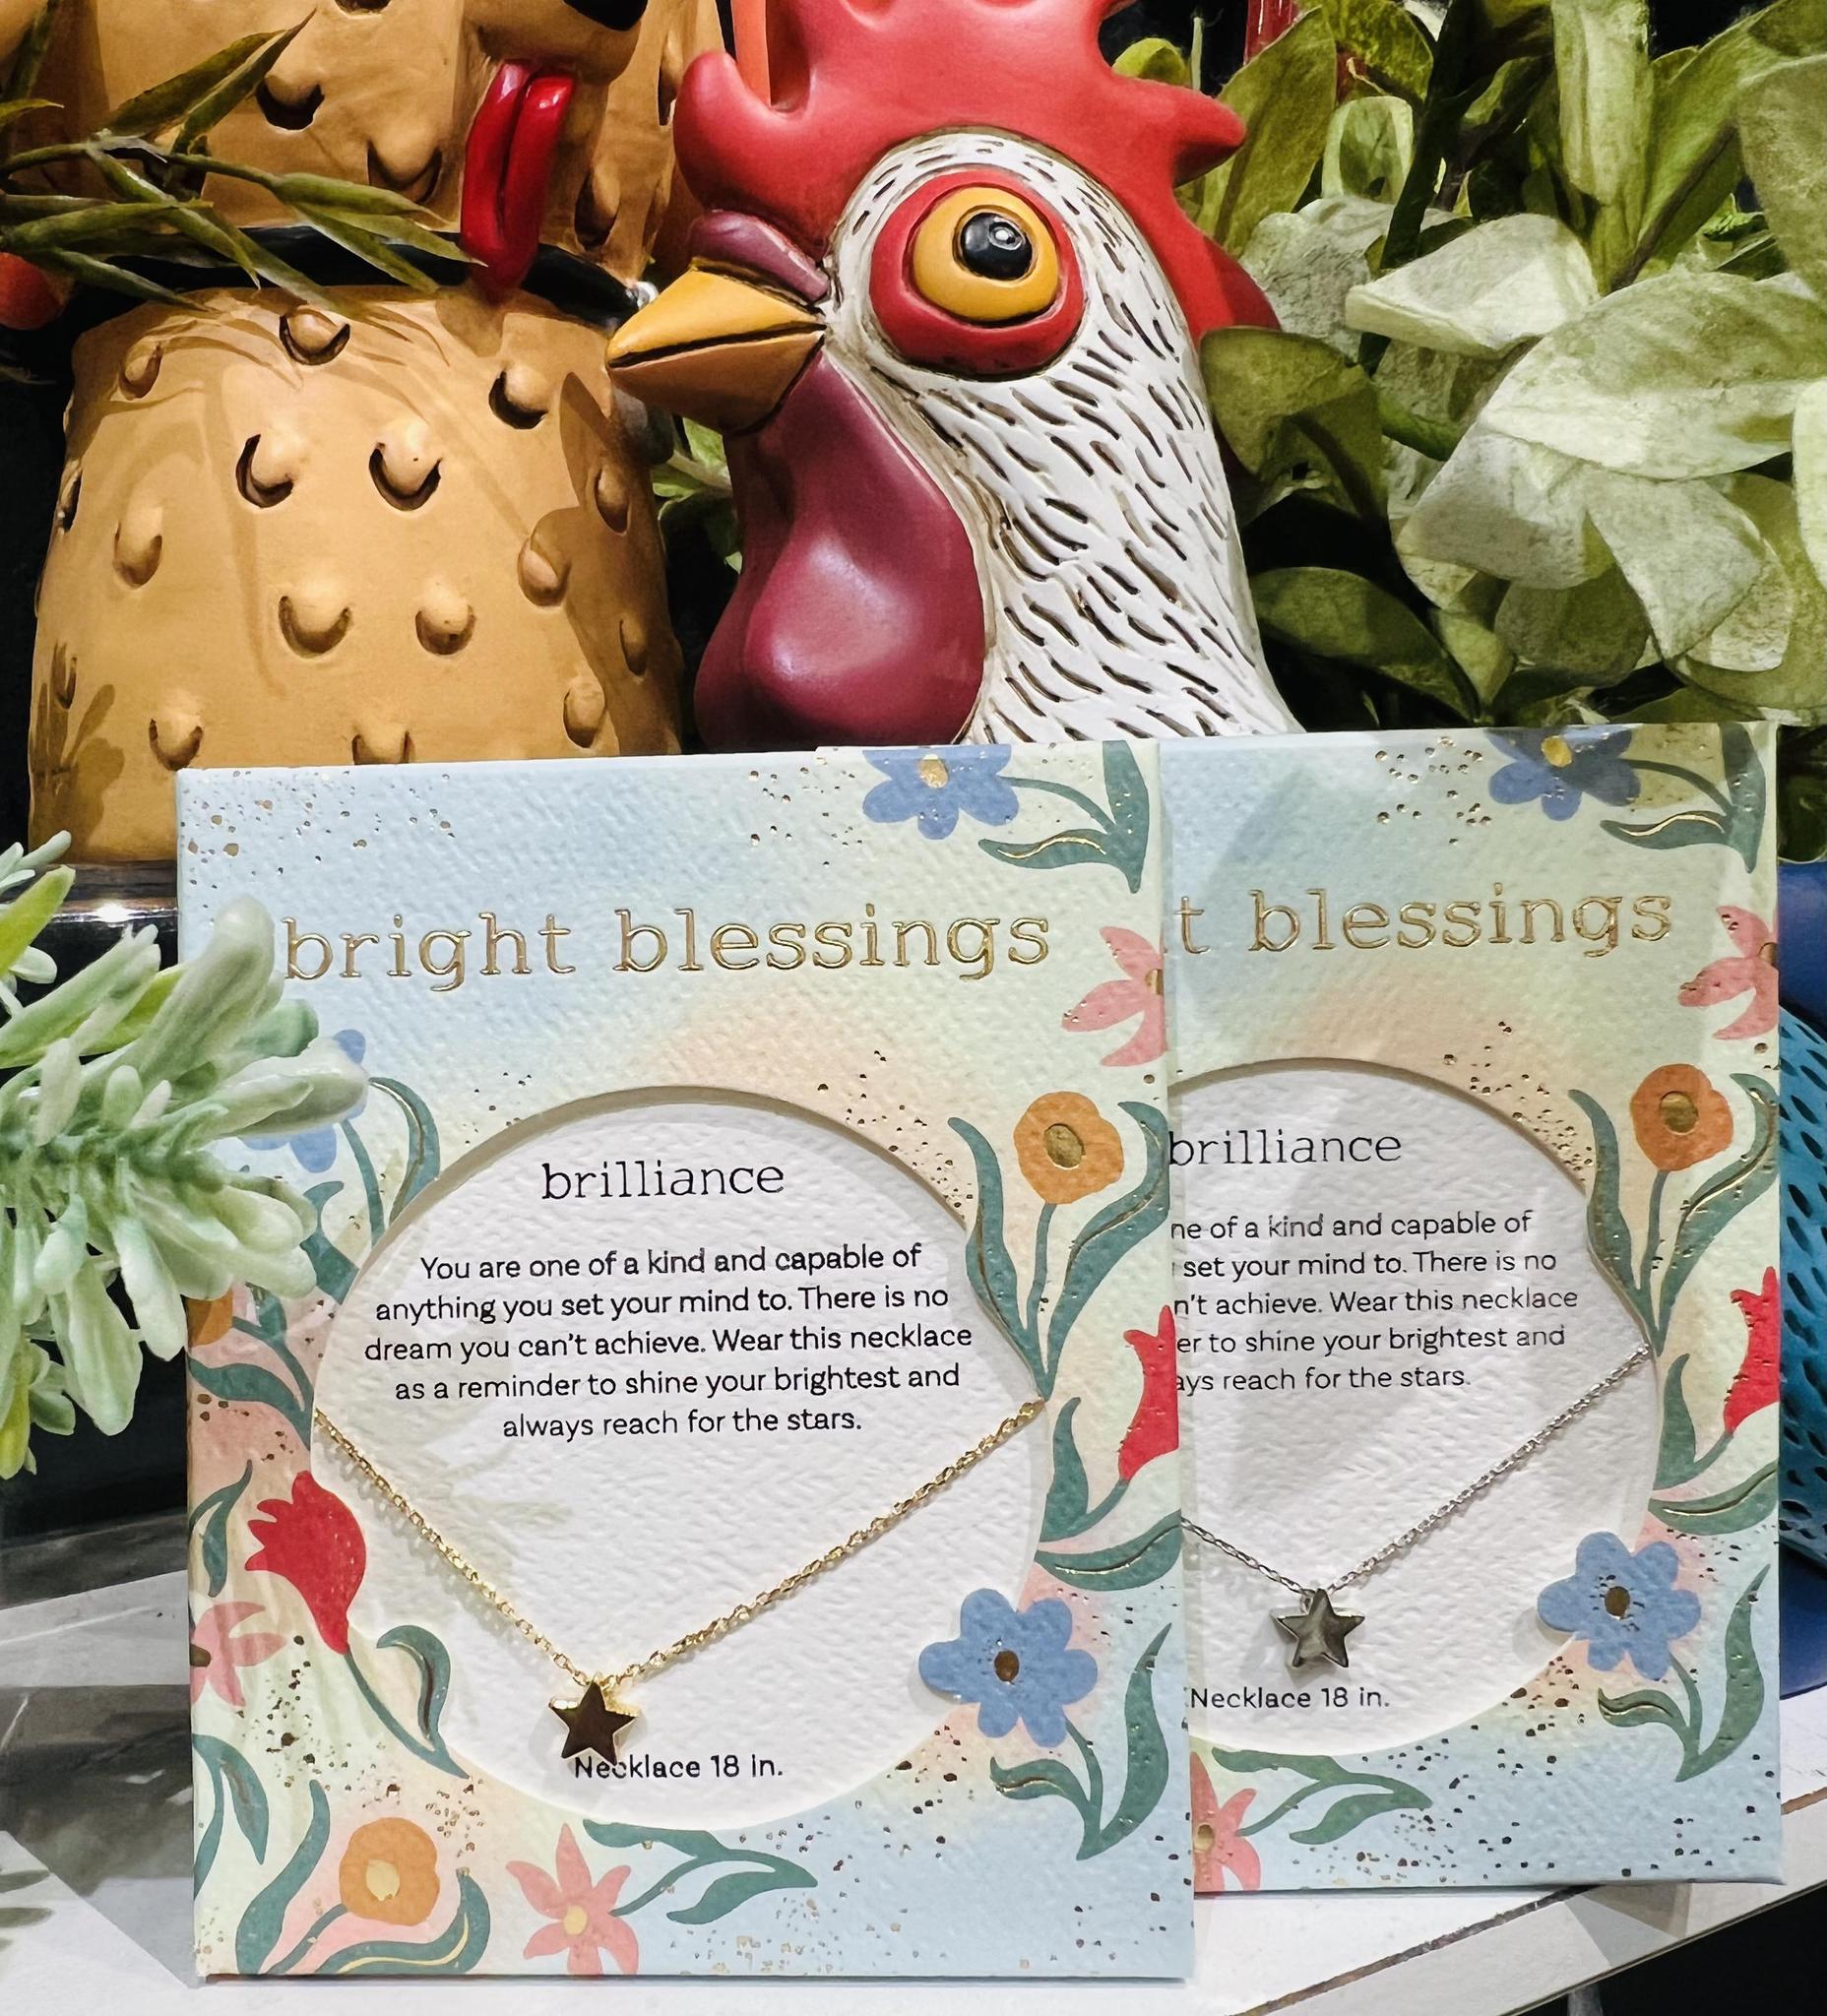 Bright Blessings Brilliance Necklace